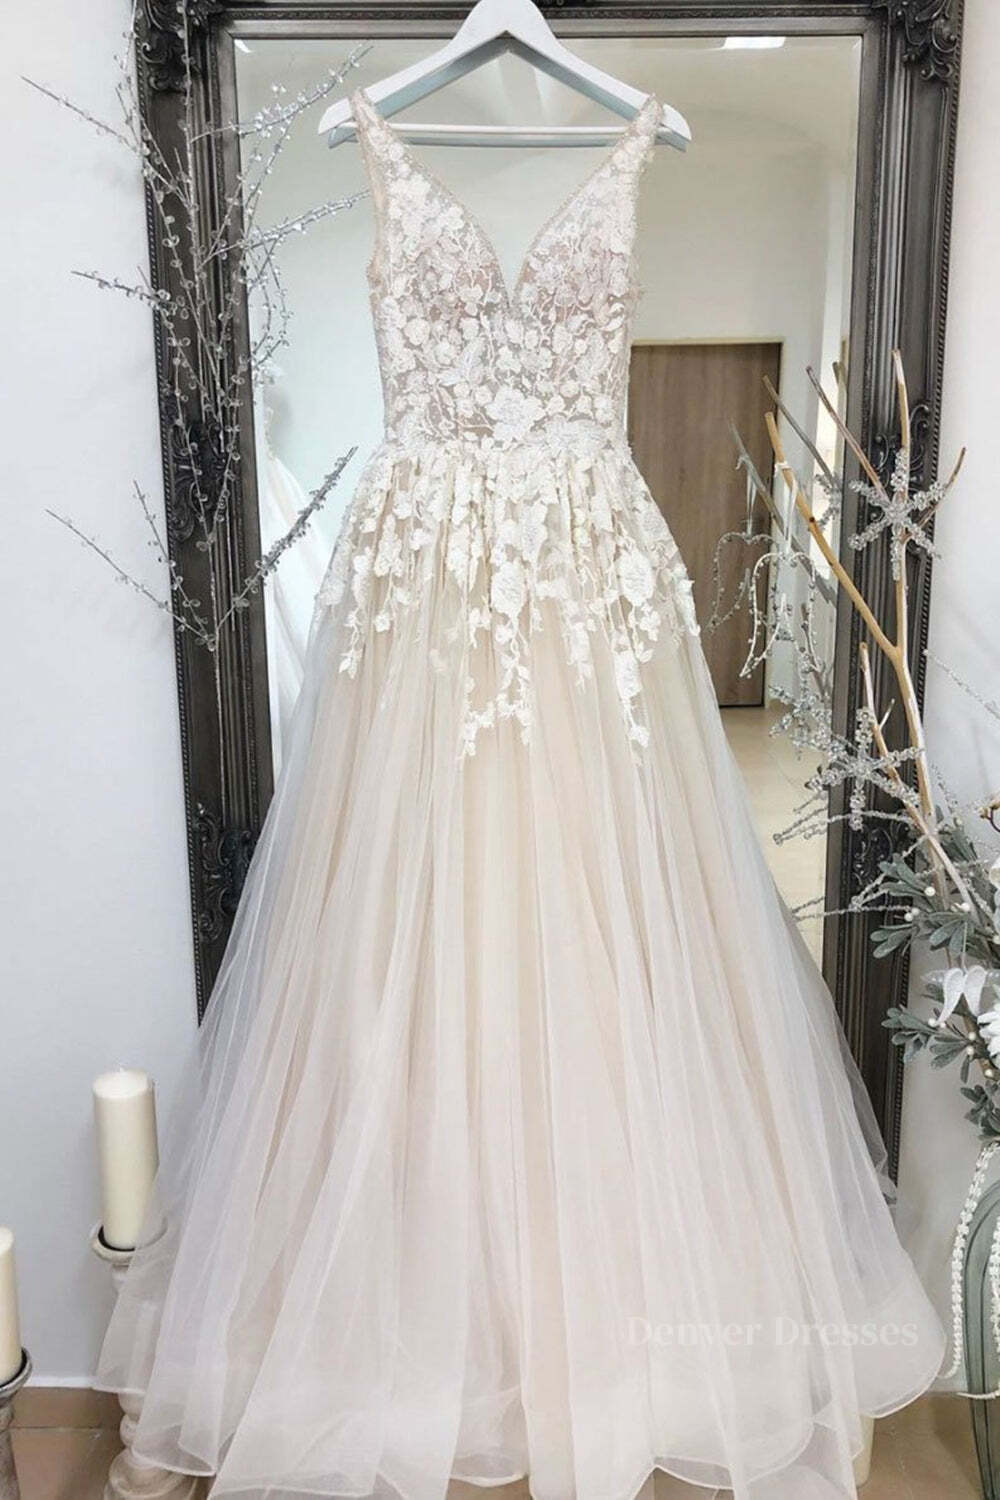 Homecoming Dress Short Prom, A Line V Neck Champagne Lace Long Prom Dresses, Champagne Lace Formal Dresses, Champagne Evening Dresses